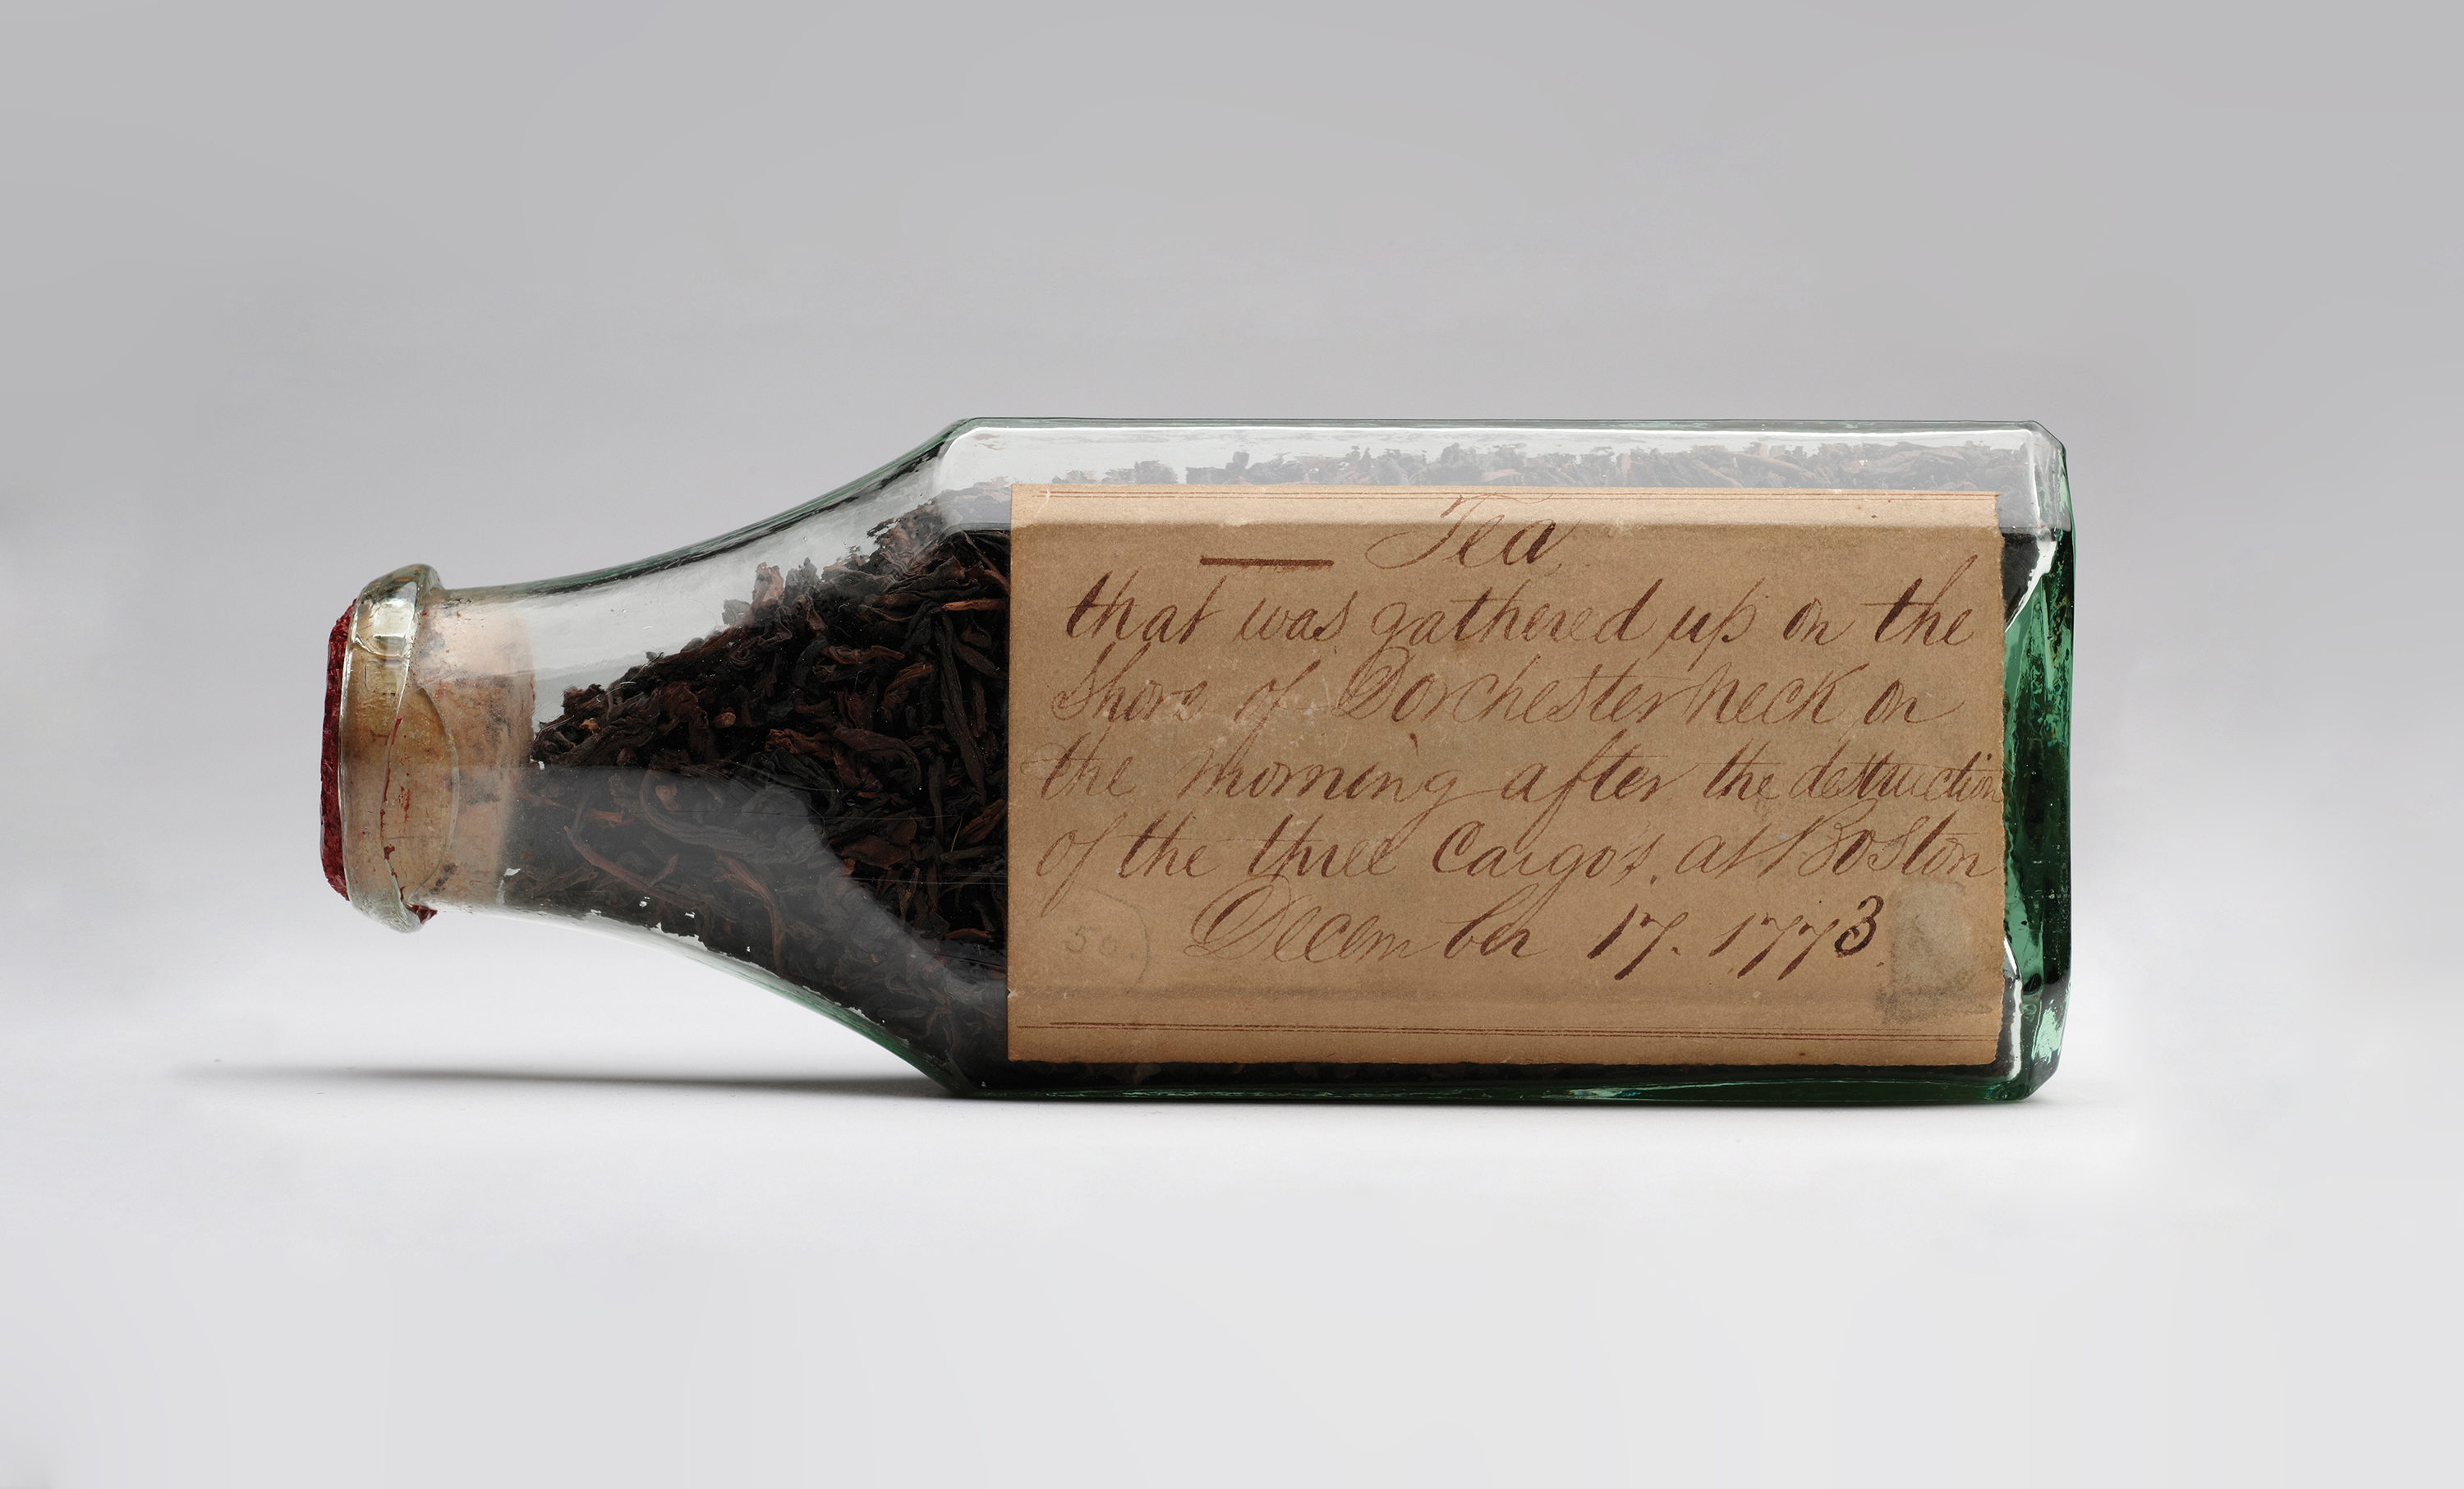 An original bottle of tea from the Boston Tea Party is on display to mark the 250th anniversary.